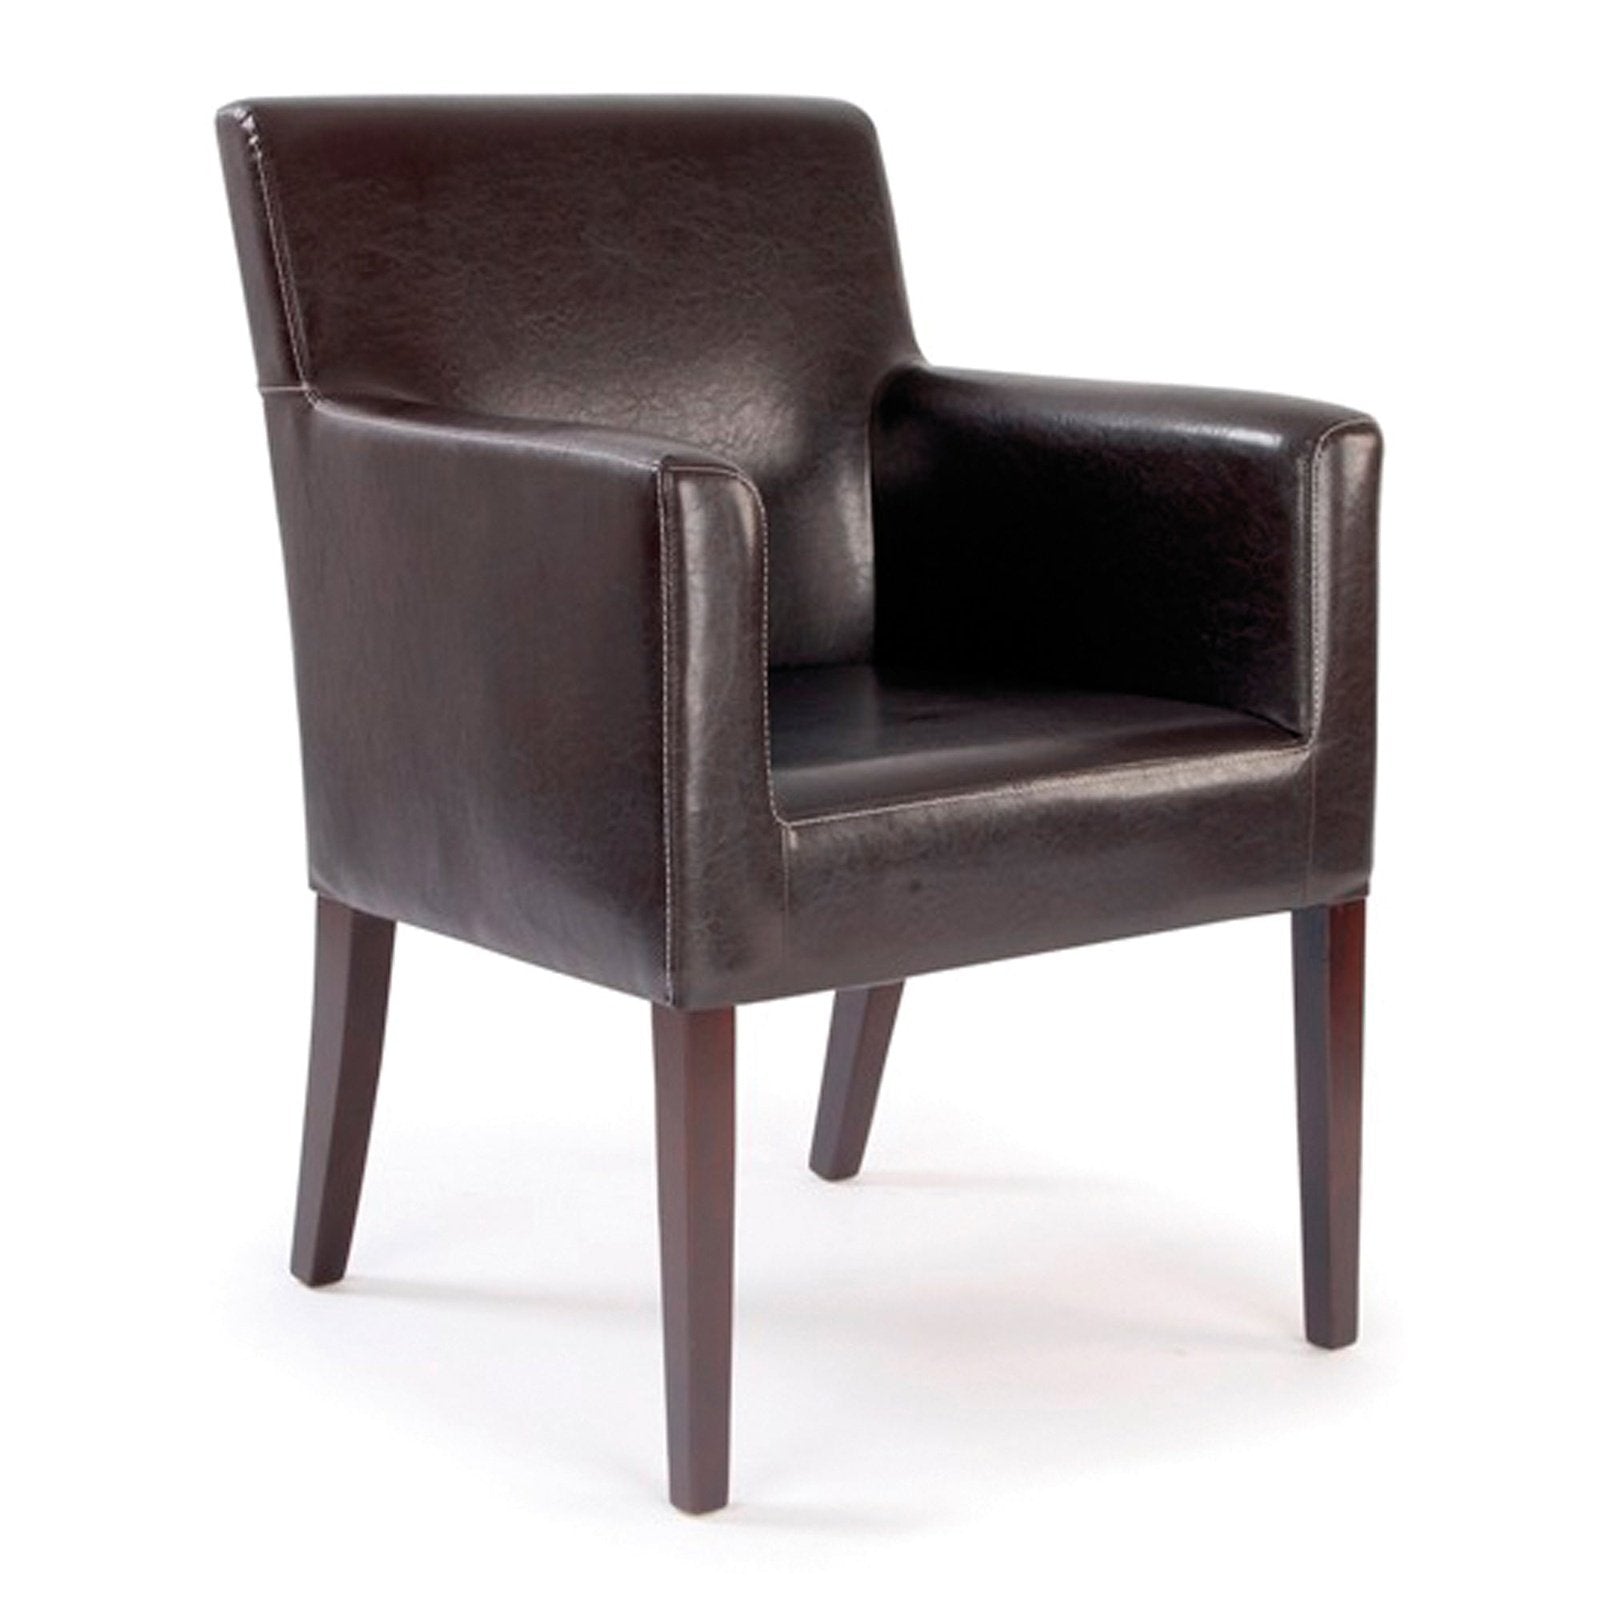 Modern Cubed Armchair Upholstered in a Durable Leather Effect Finish - Brown - Office Products Online